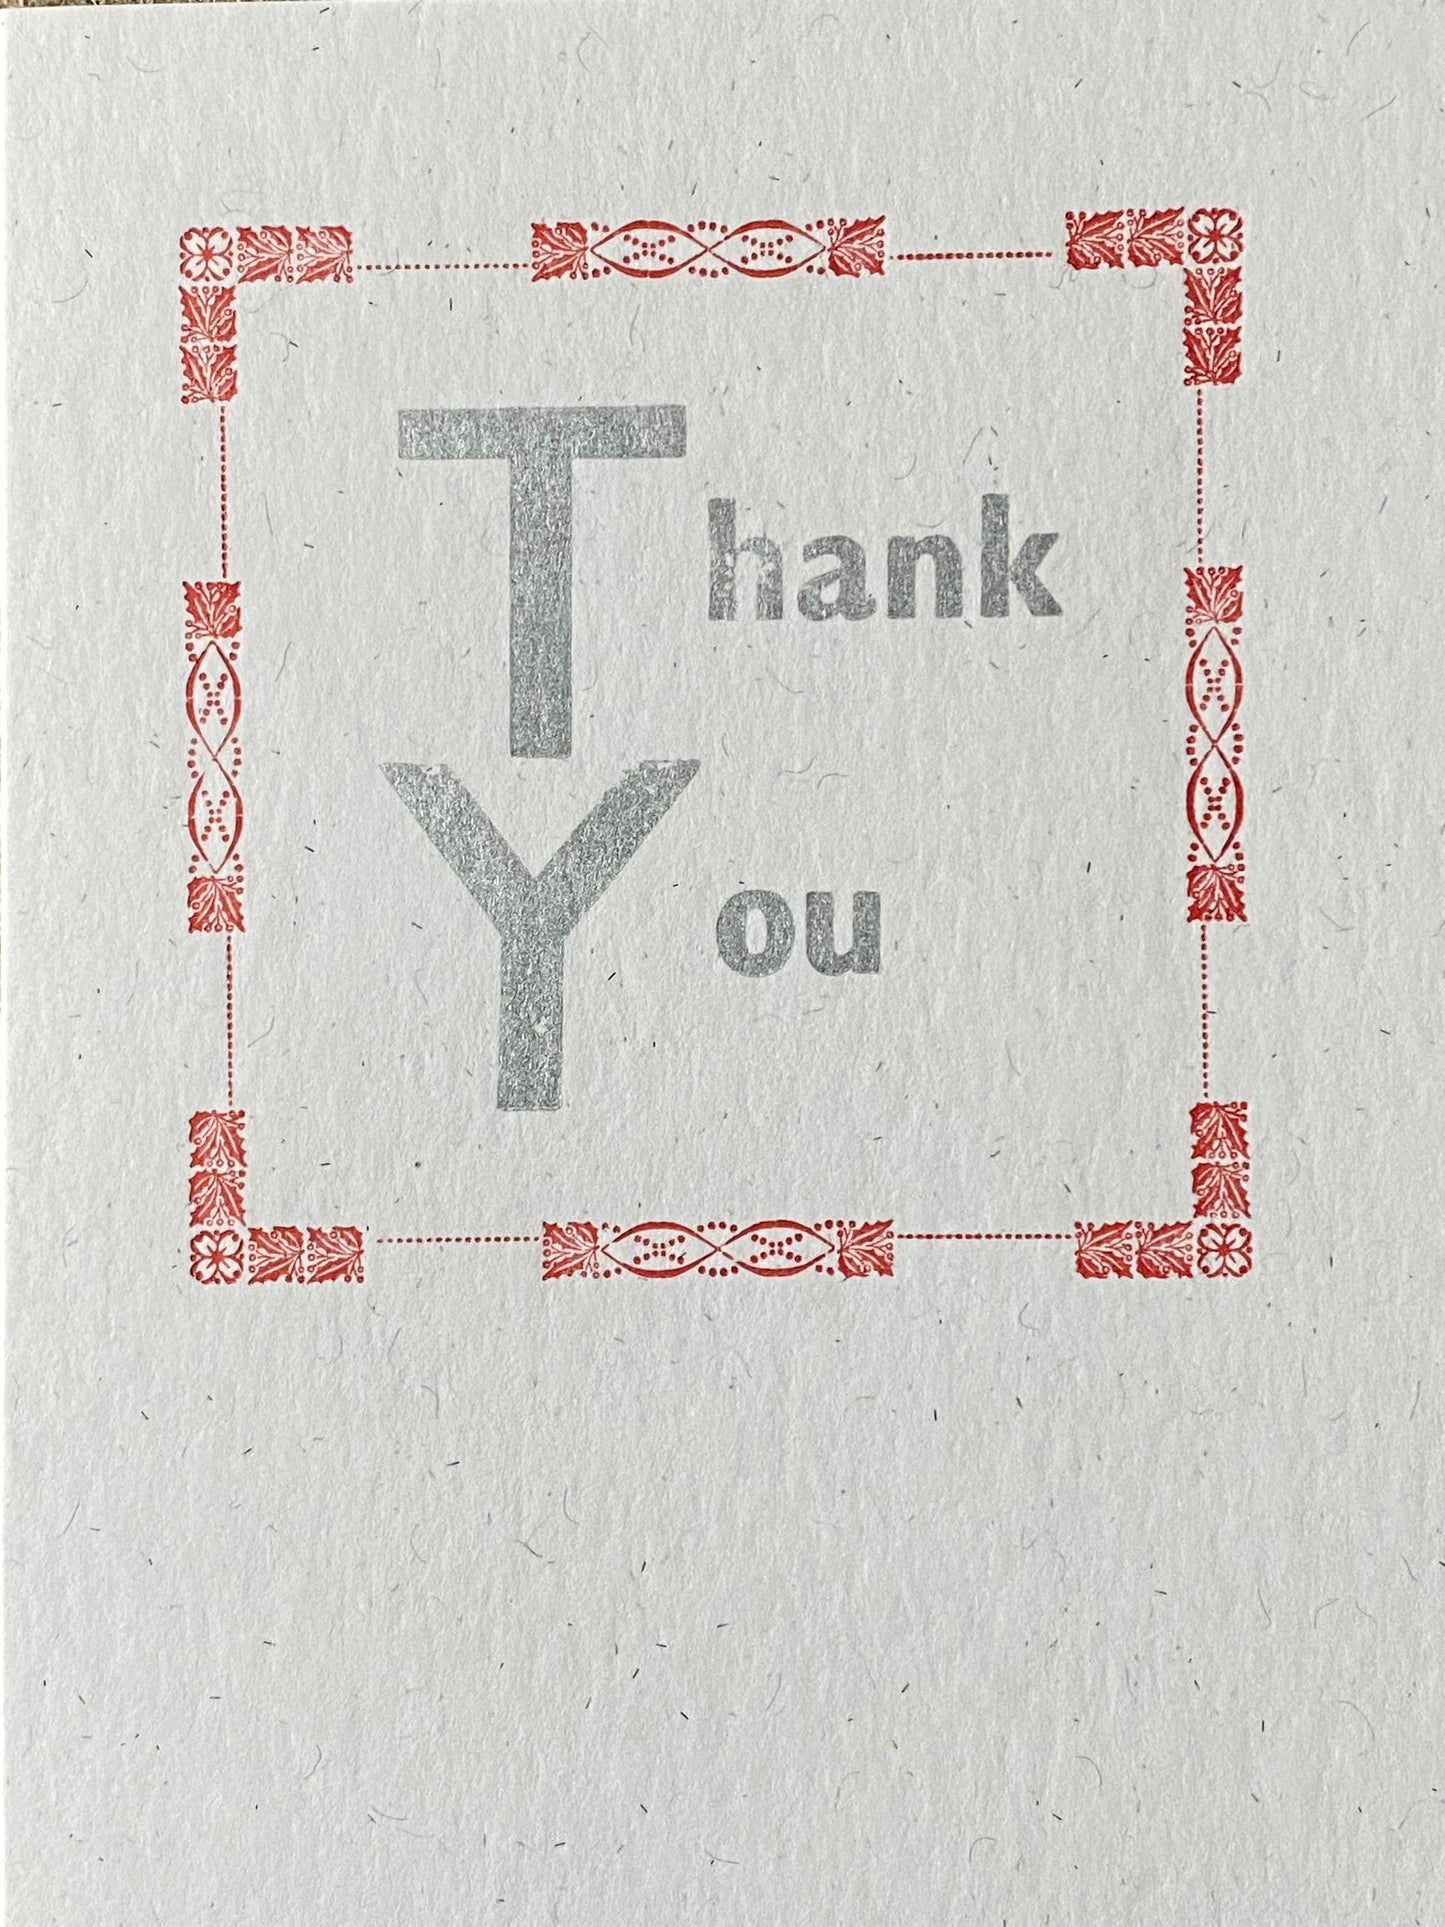 Load image into Gallery viewer, Thank you cards - printed with metal and wood type
